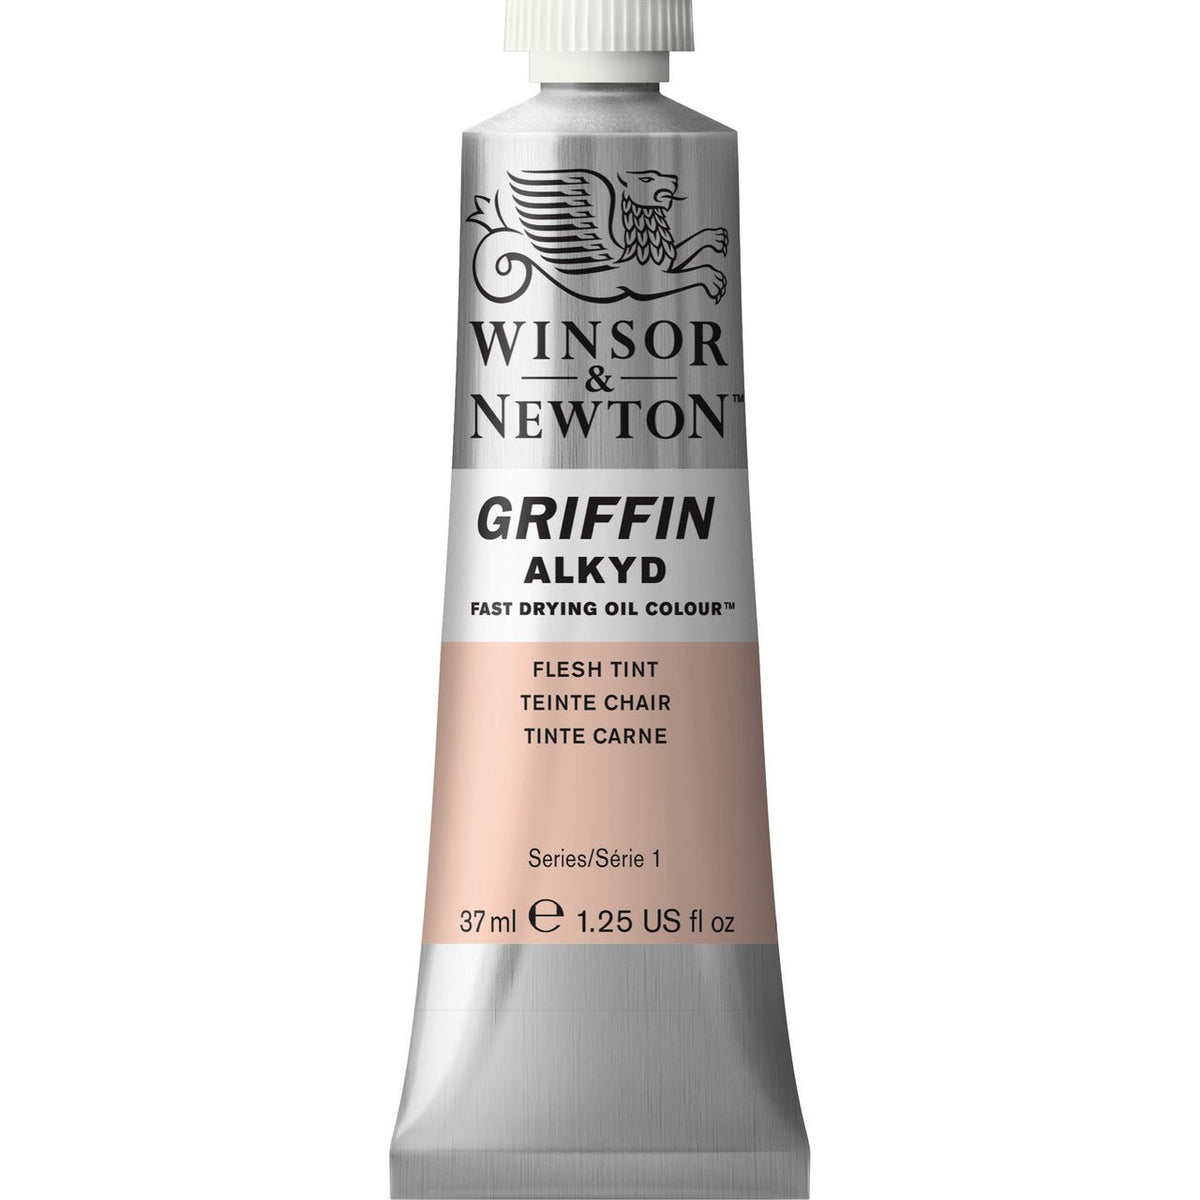 Winsor & Newton Griffin Alkyd 37ml Pale Rose Blush (formerly flesh tint) - merriartist.com